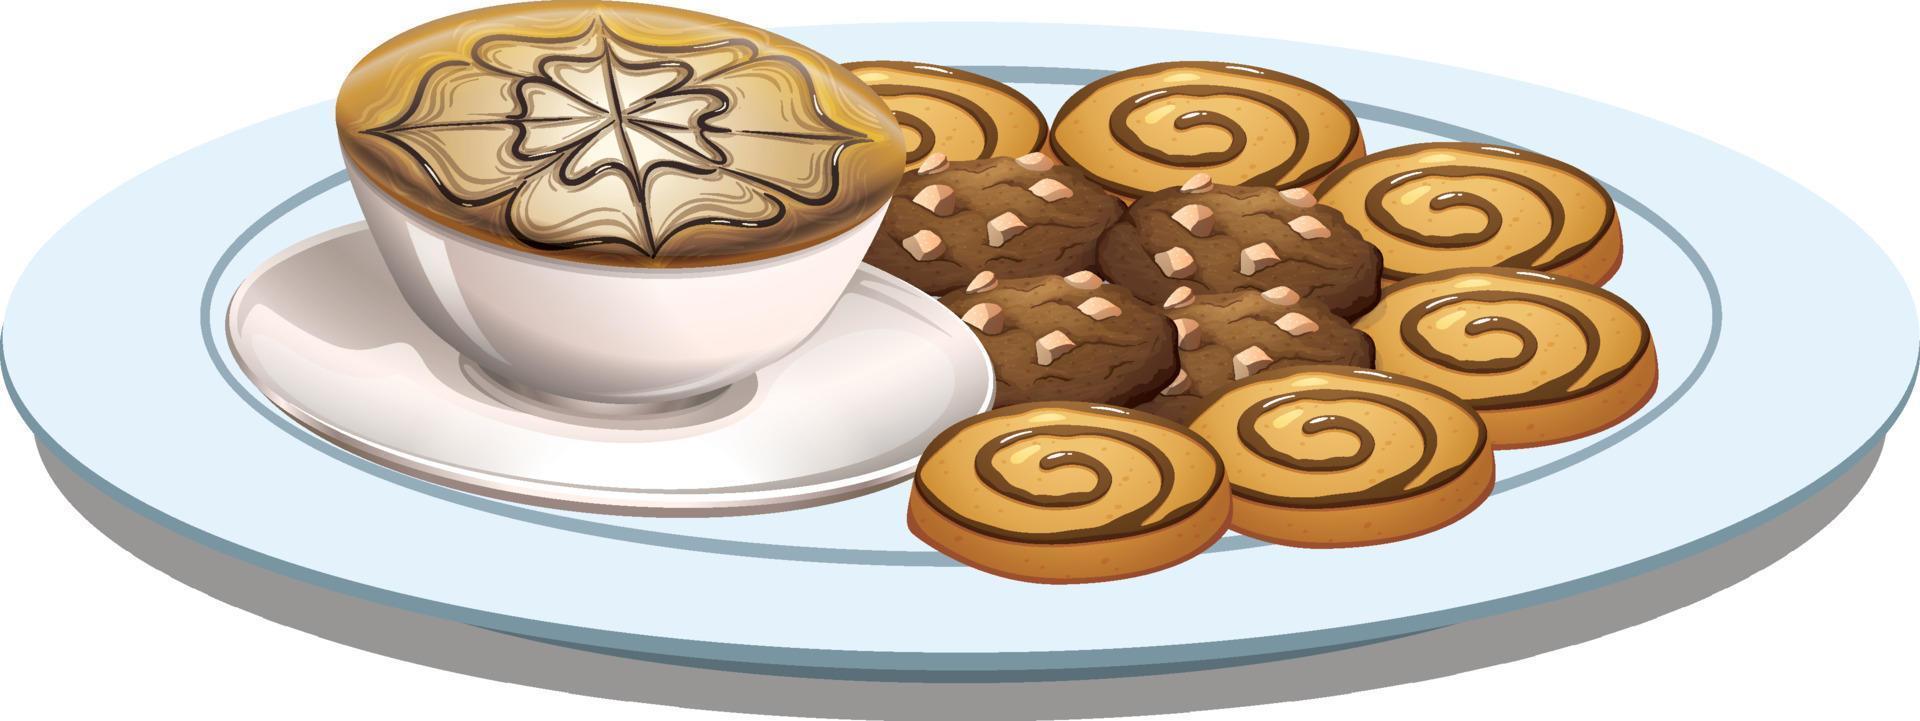 Cookies and coffee in a plate vector